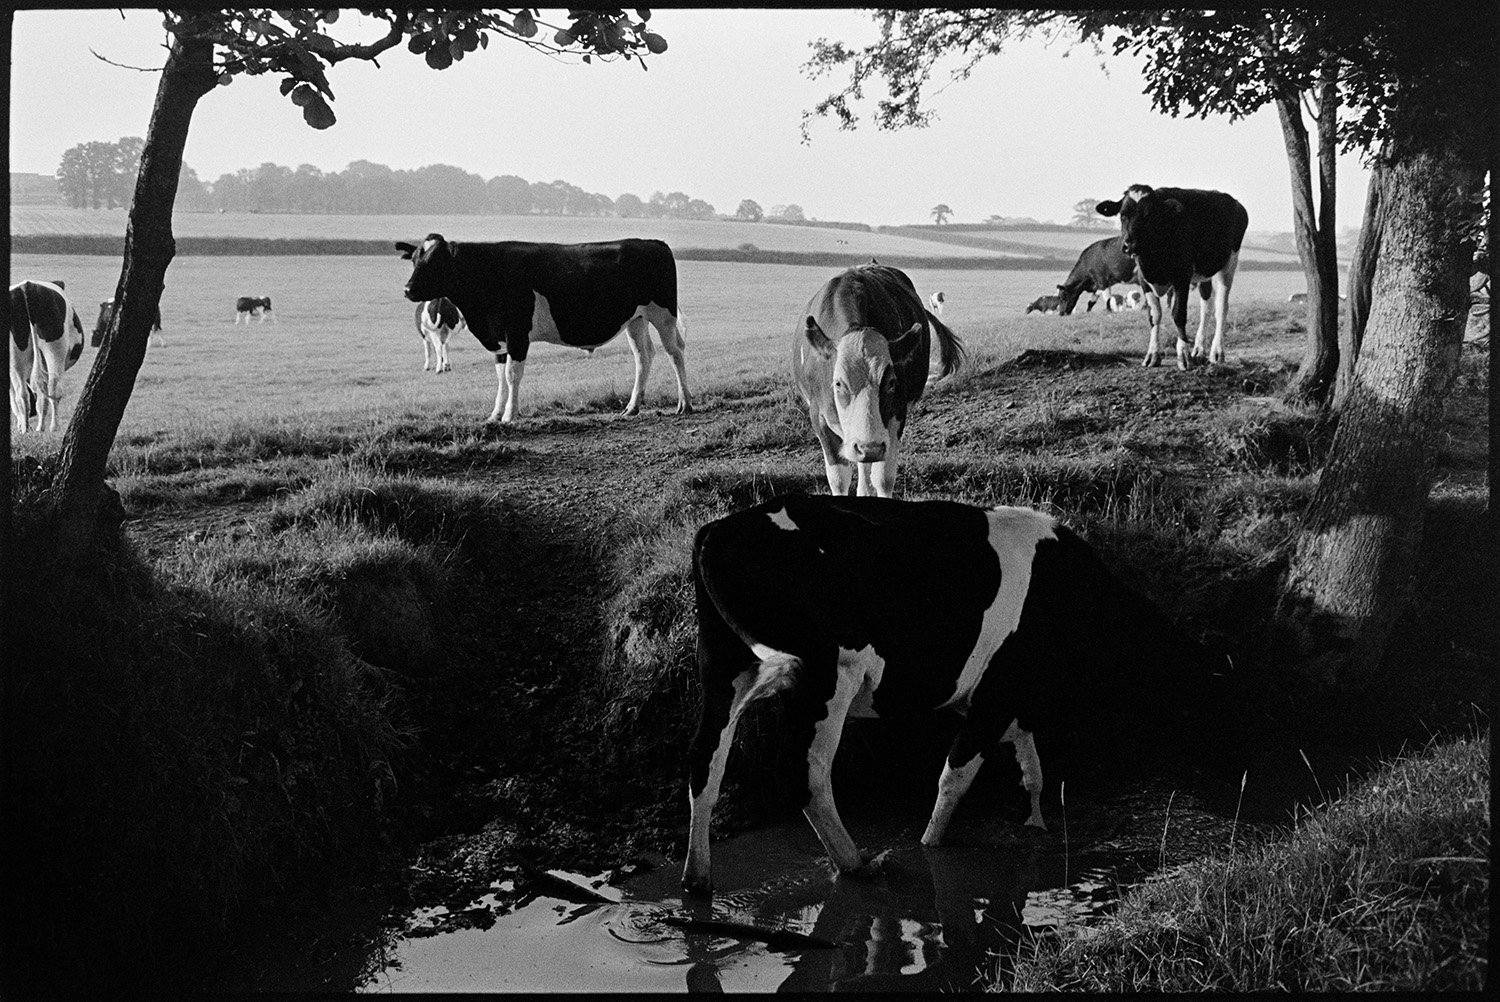 Cows cooling off in stream. 
[Cows cooling off in a stream running by a field at Parsonage, Iddesleigh. A landscape of tress, fields and hedges can be seen in the background.]